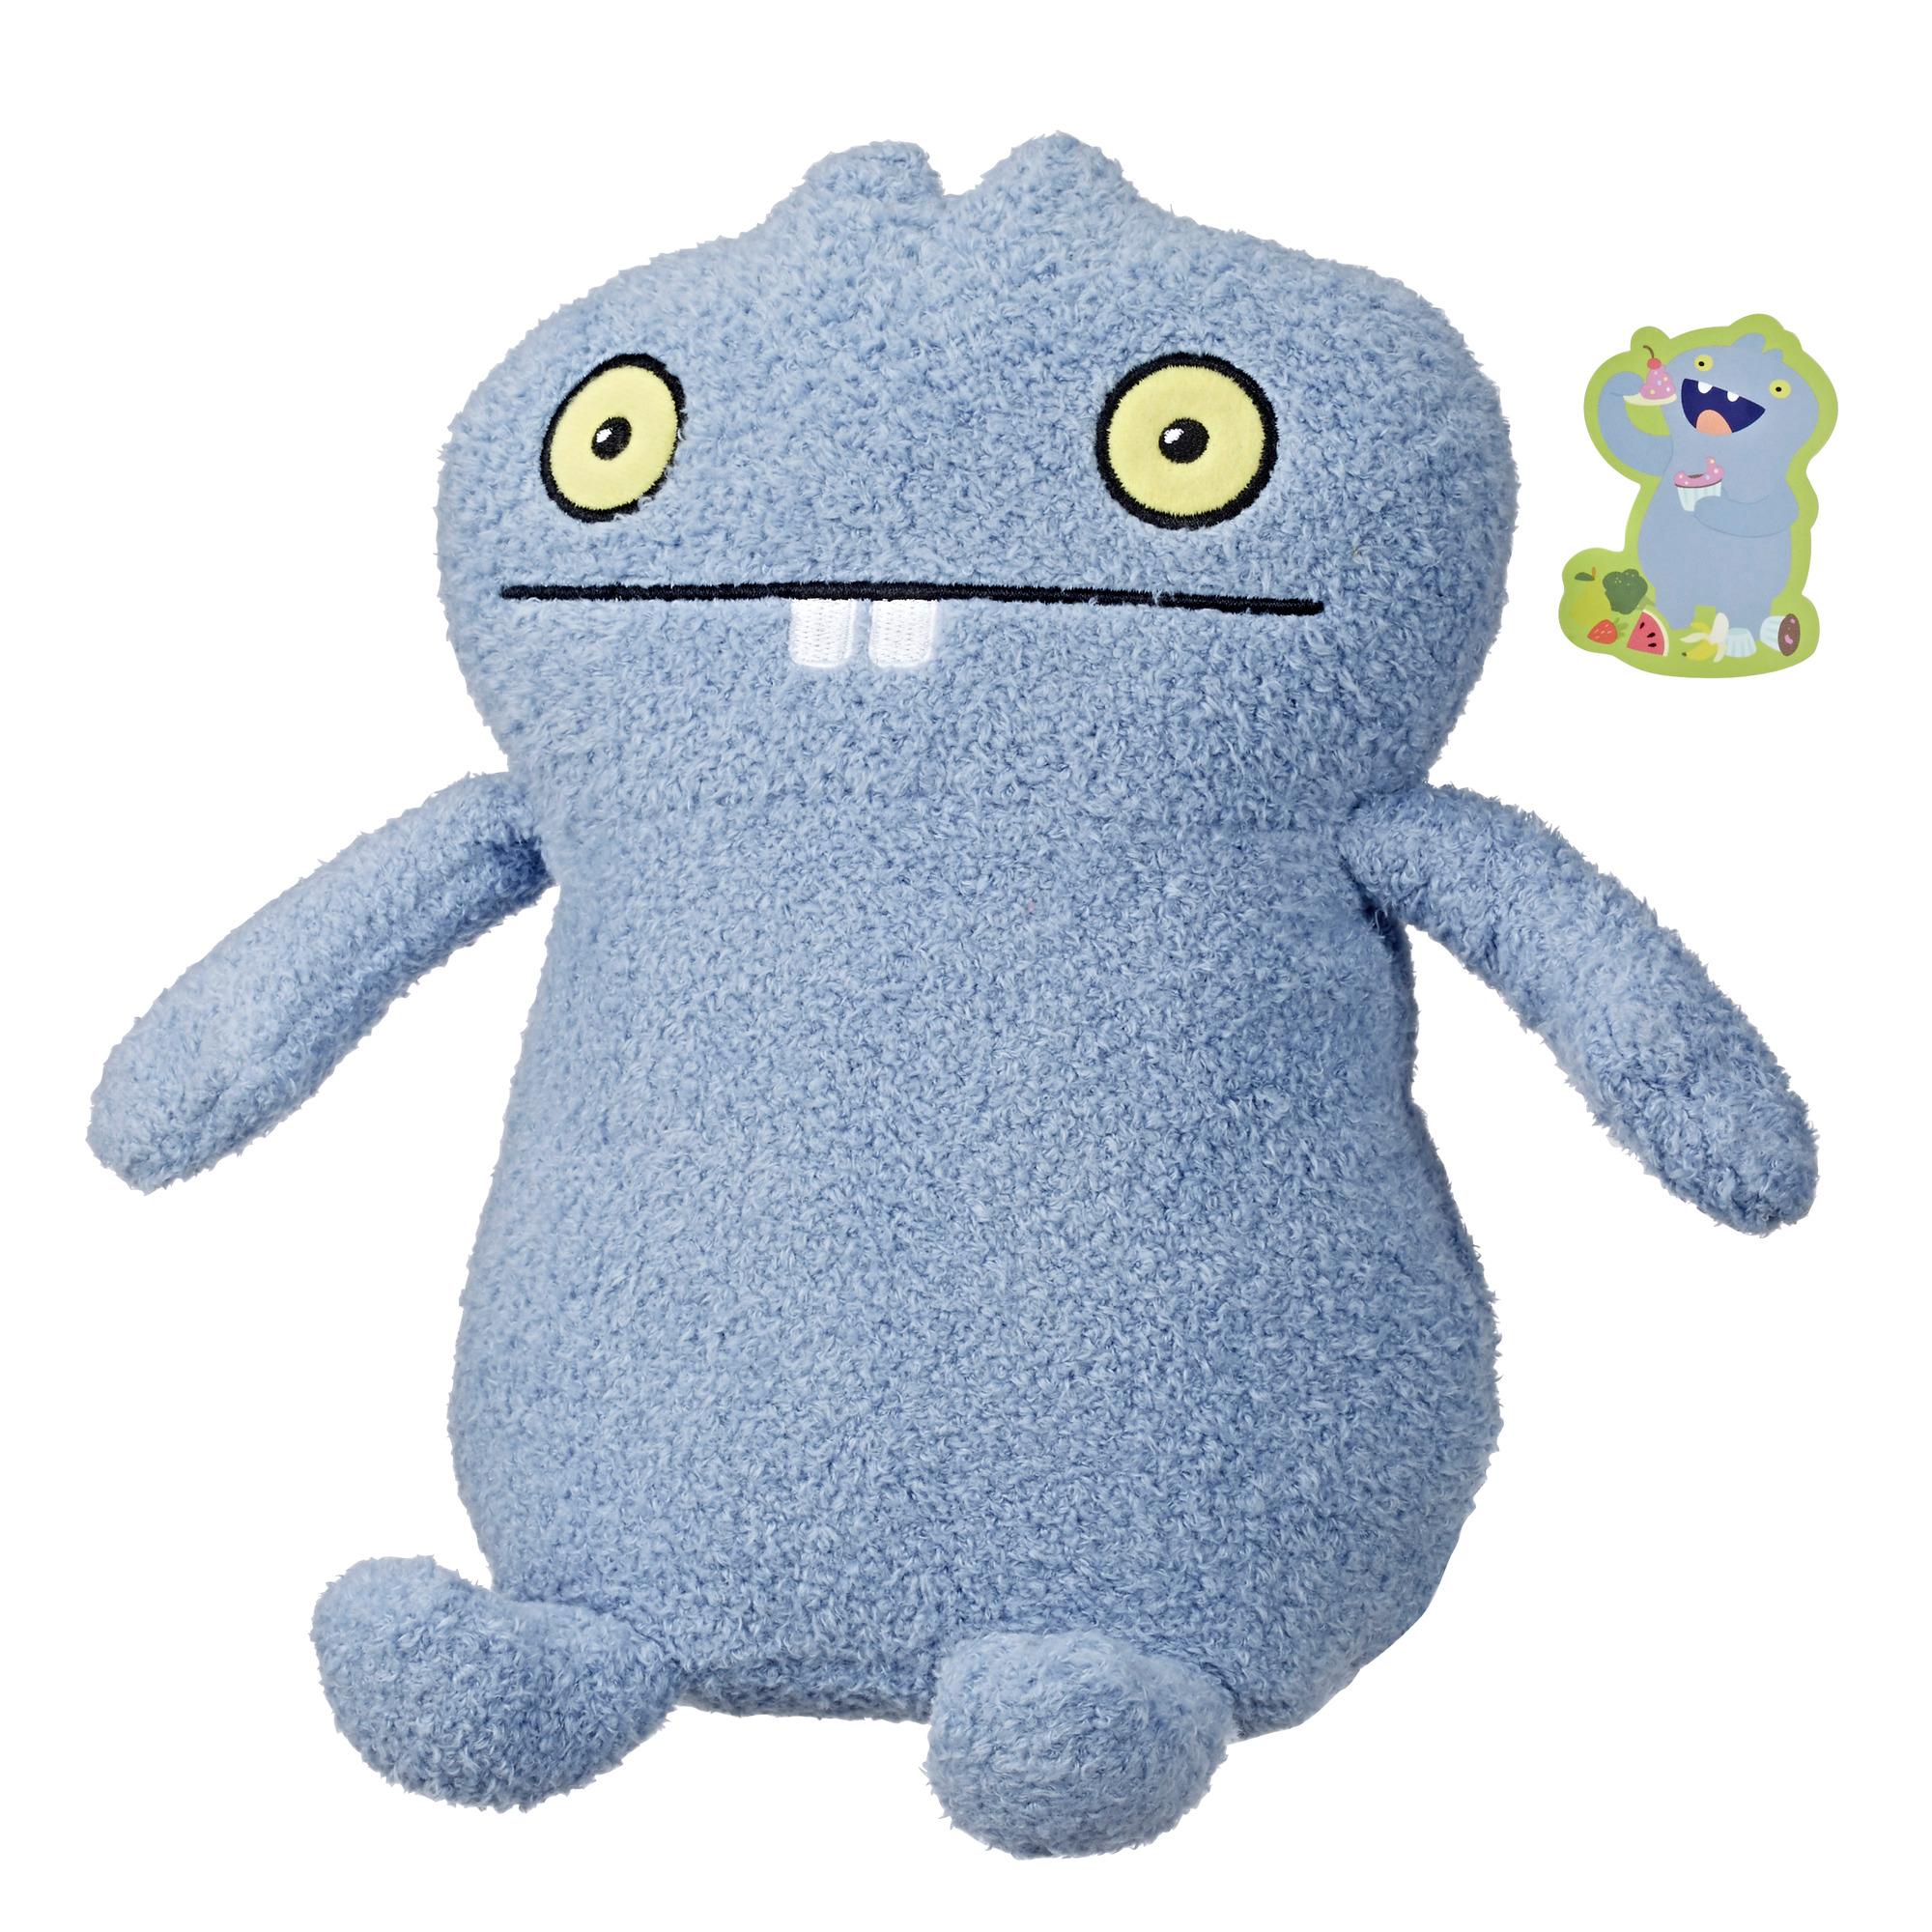 UglyDolls Hungrily Yours Babo Stuffed Plush Toy, 10.5 inches tall